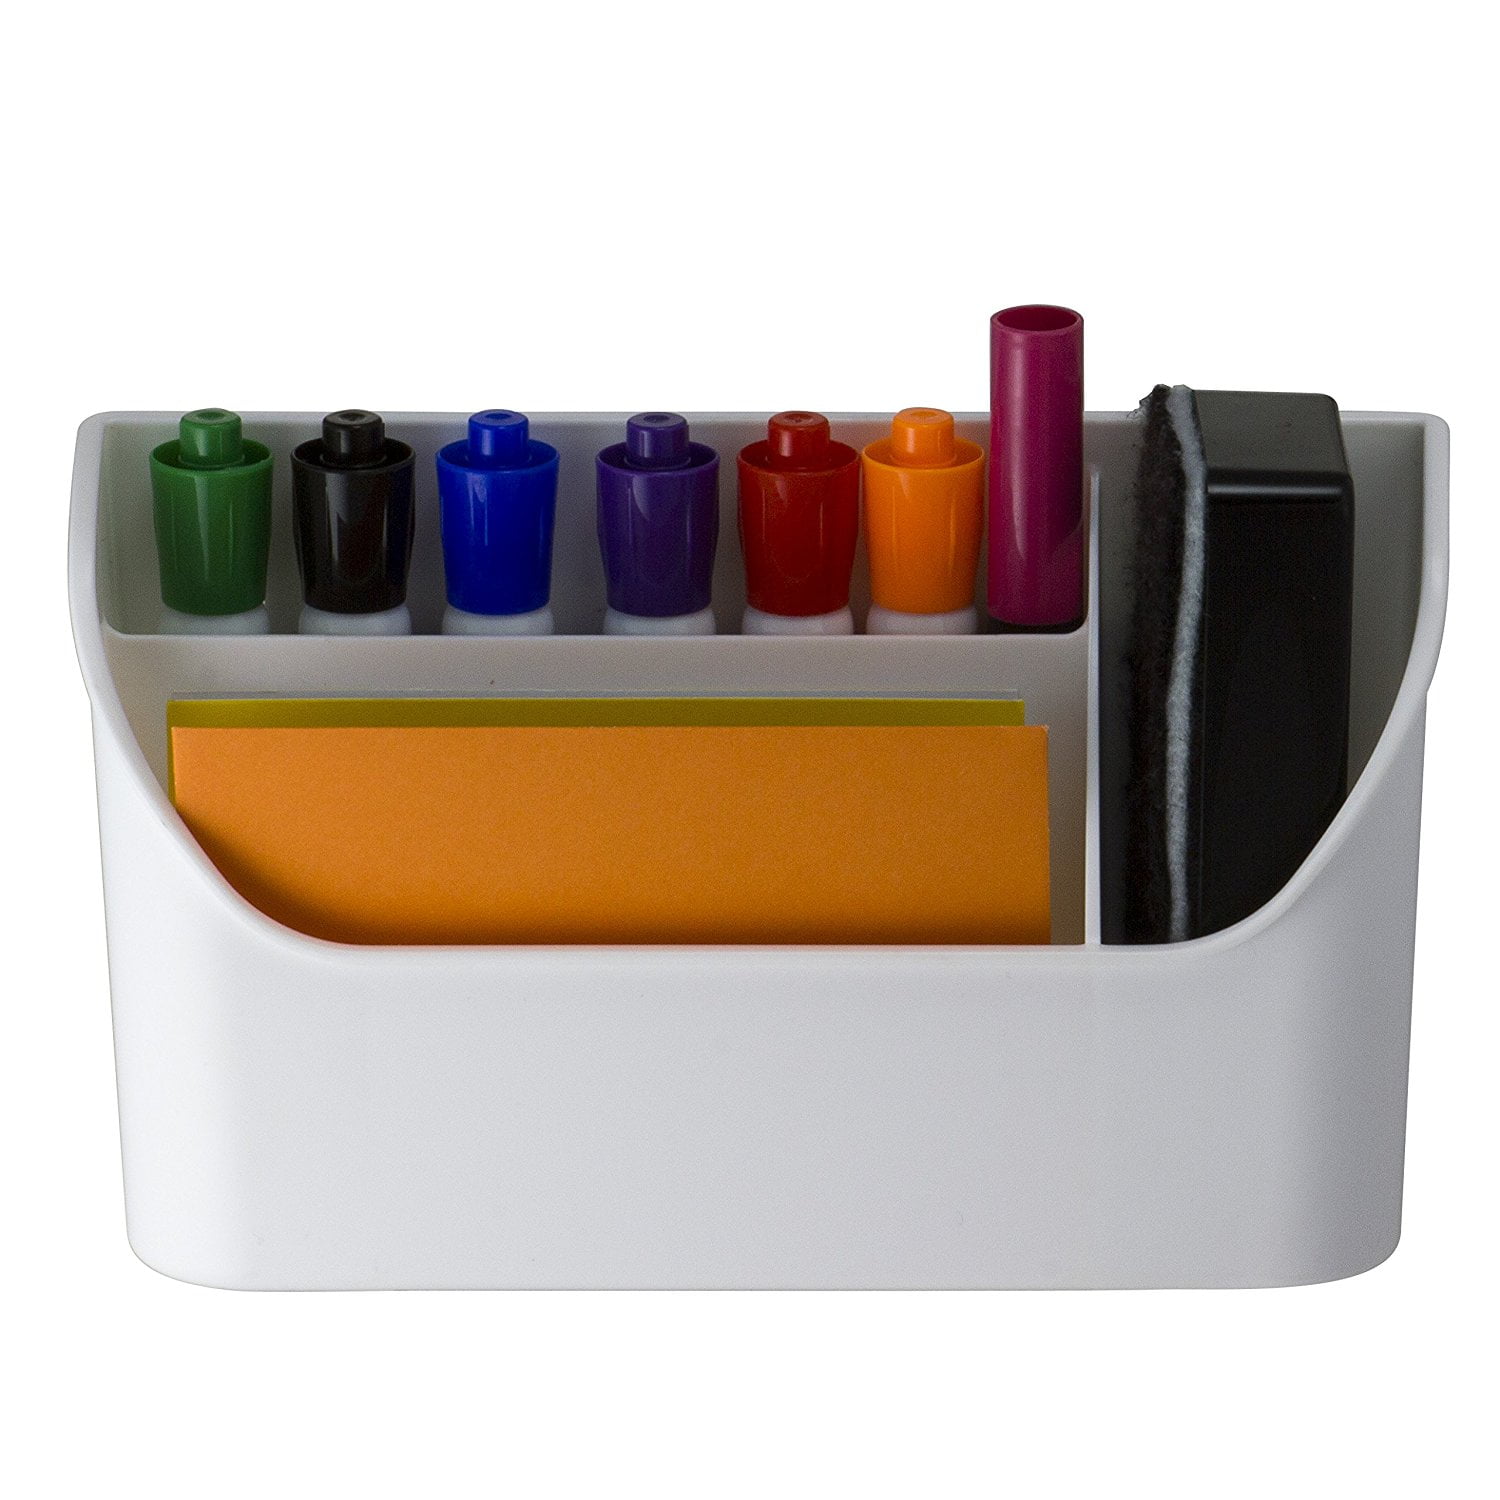 Magnet Plus Magnetic Supplies Organizer White 3 compartments 